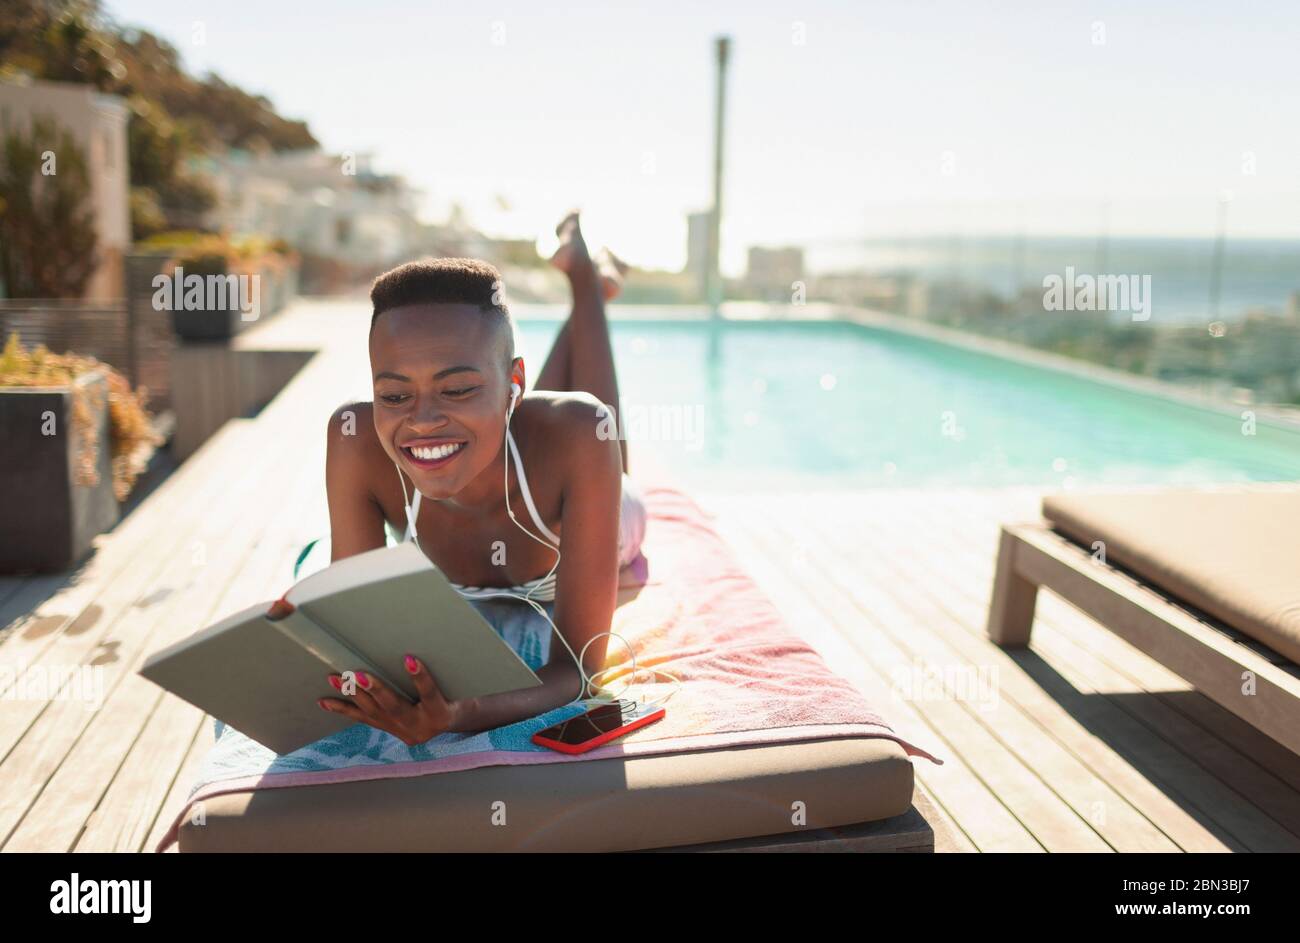 Smiling, carefree young woman reading book at sunny poolside Stock Photo